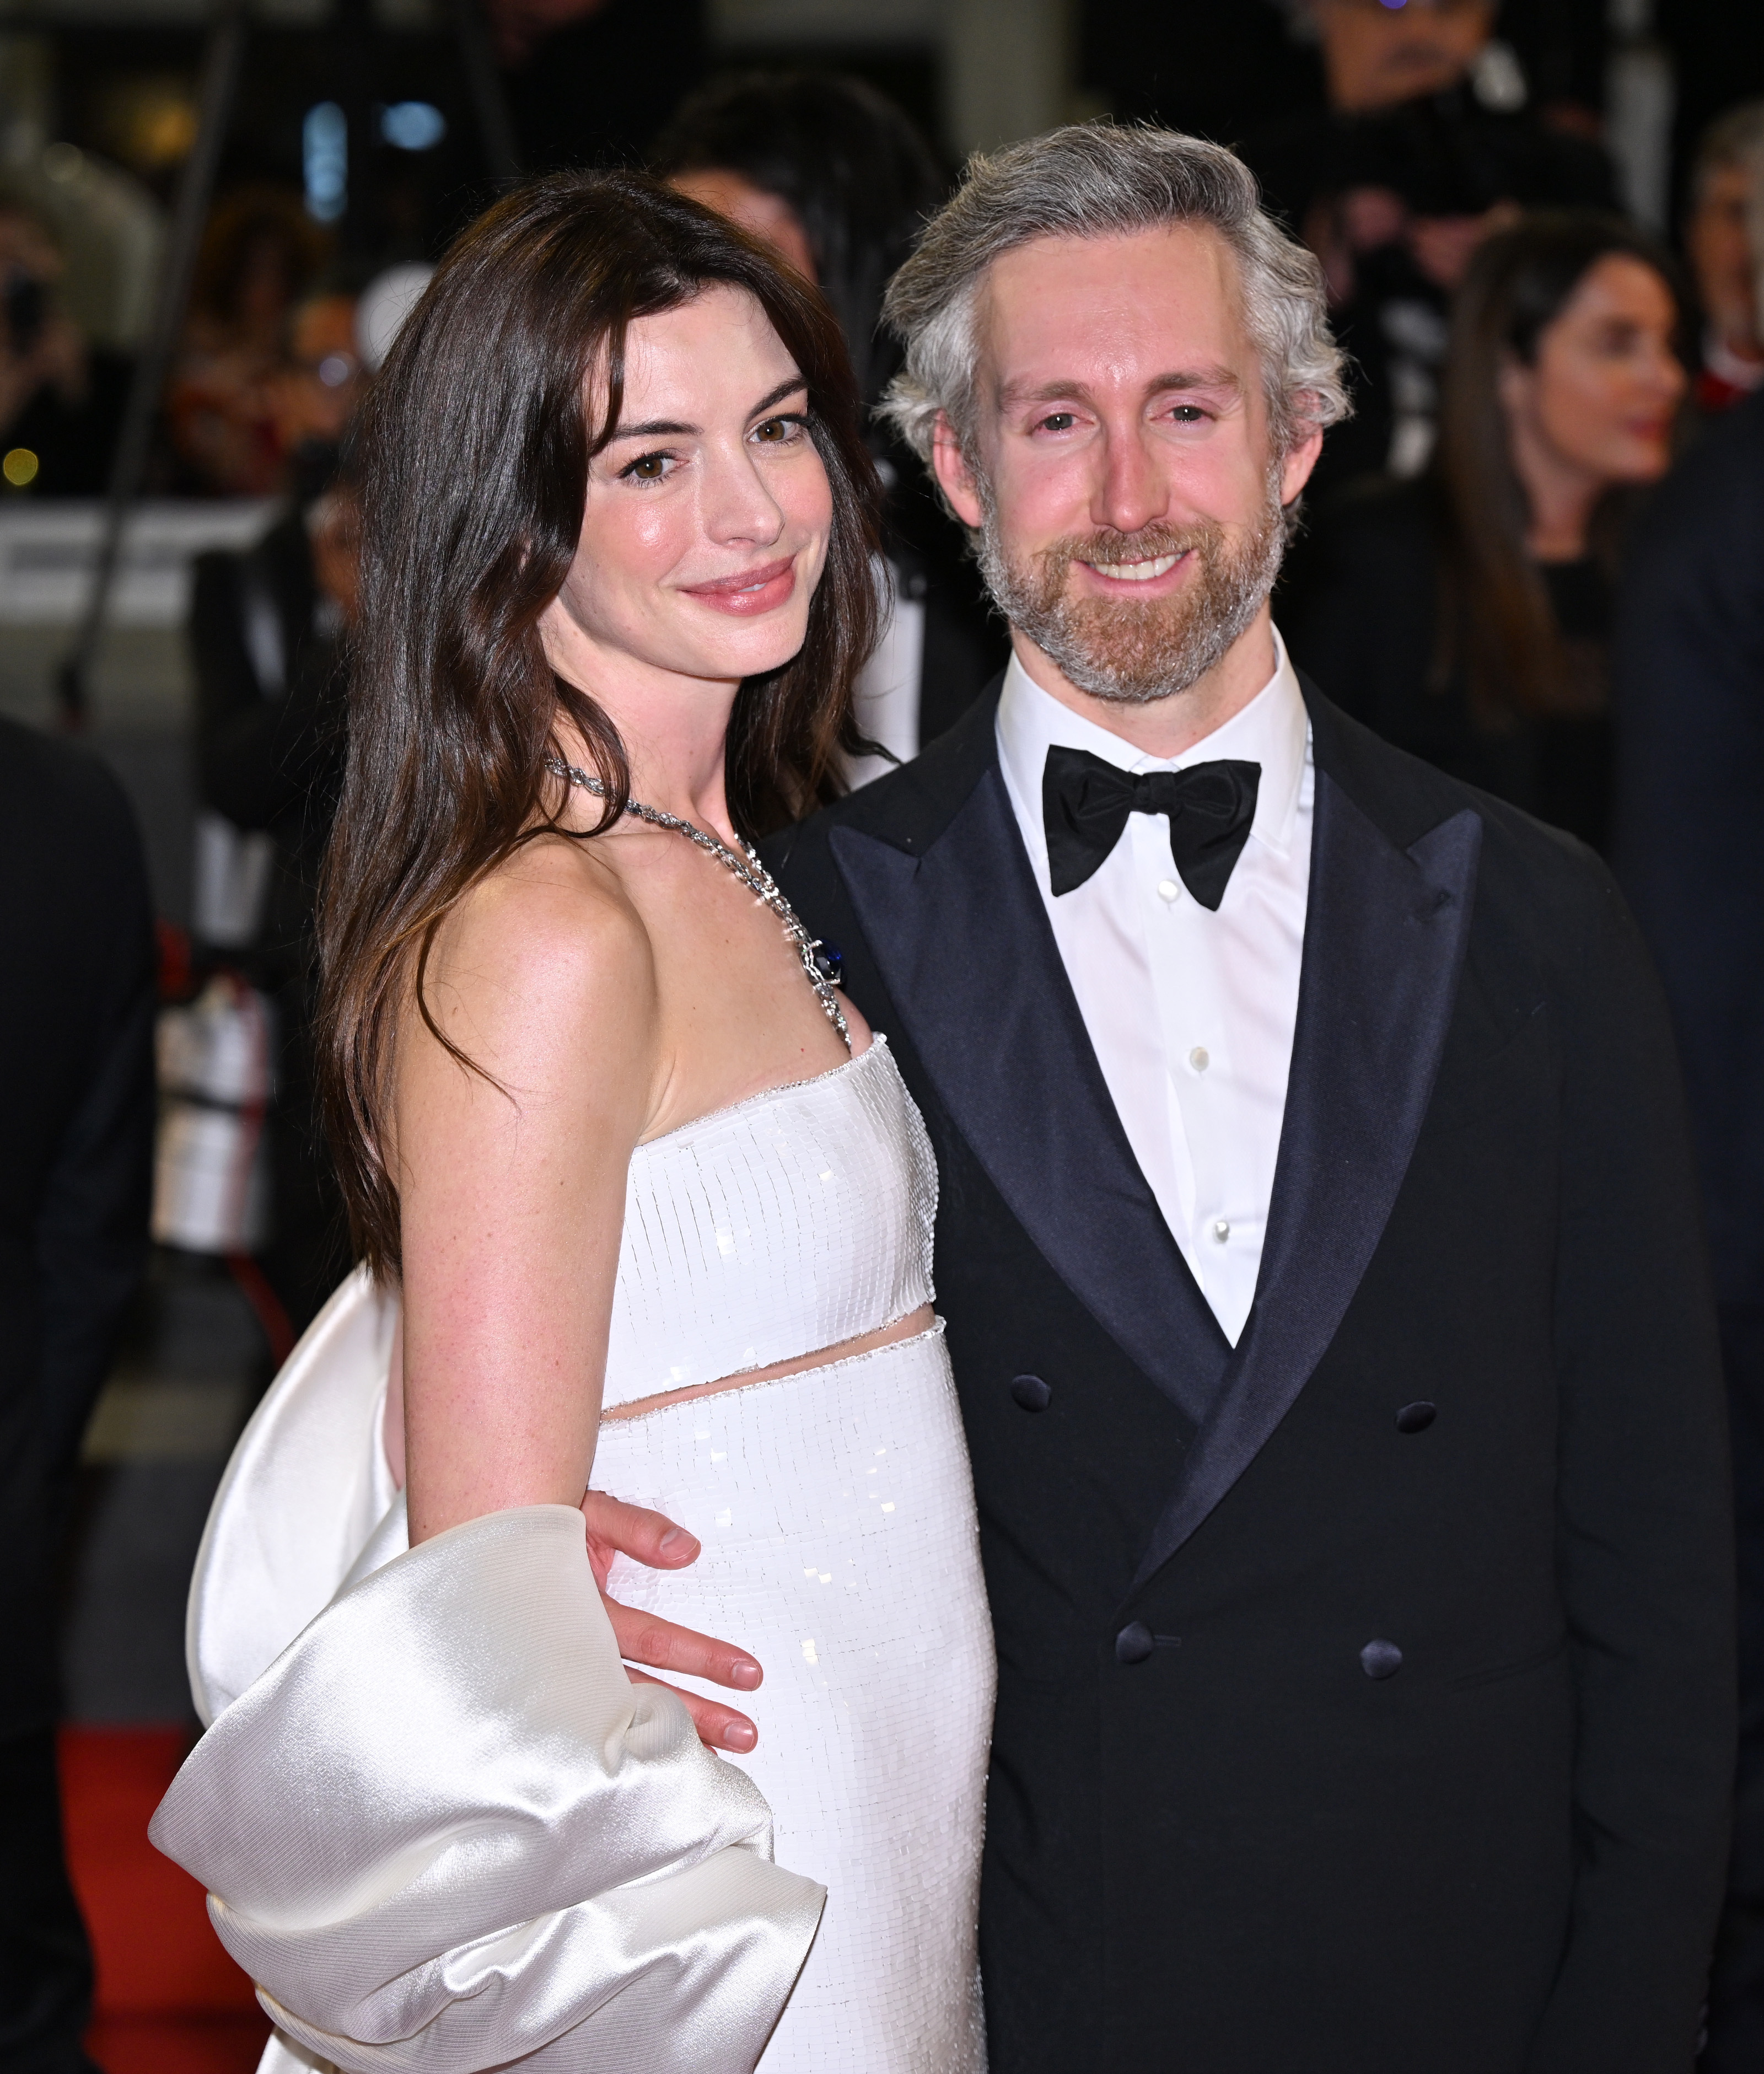 Anne Hathaway and Adam Shulman in Cannes, France on May 19, 2022 | Source: Getty Images